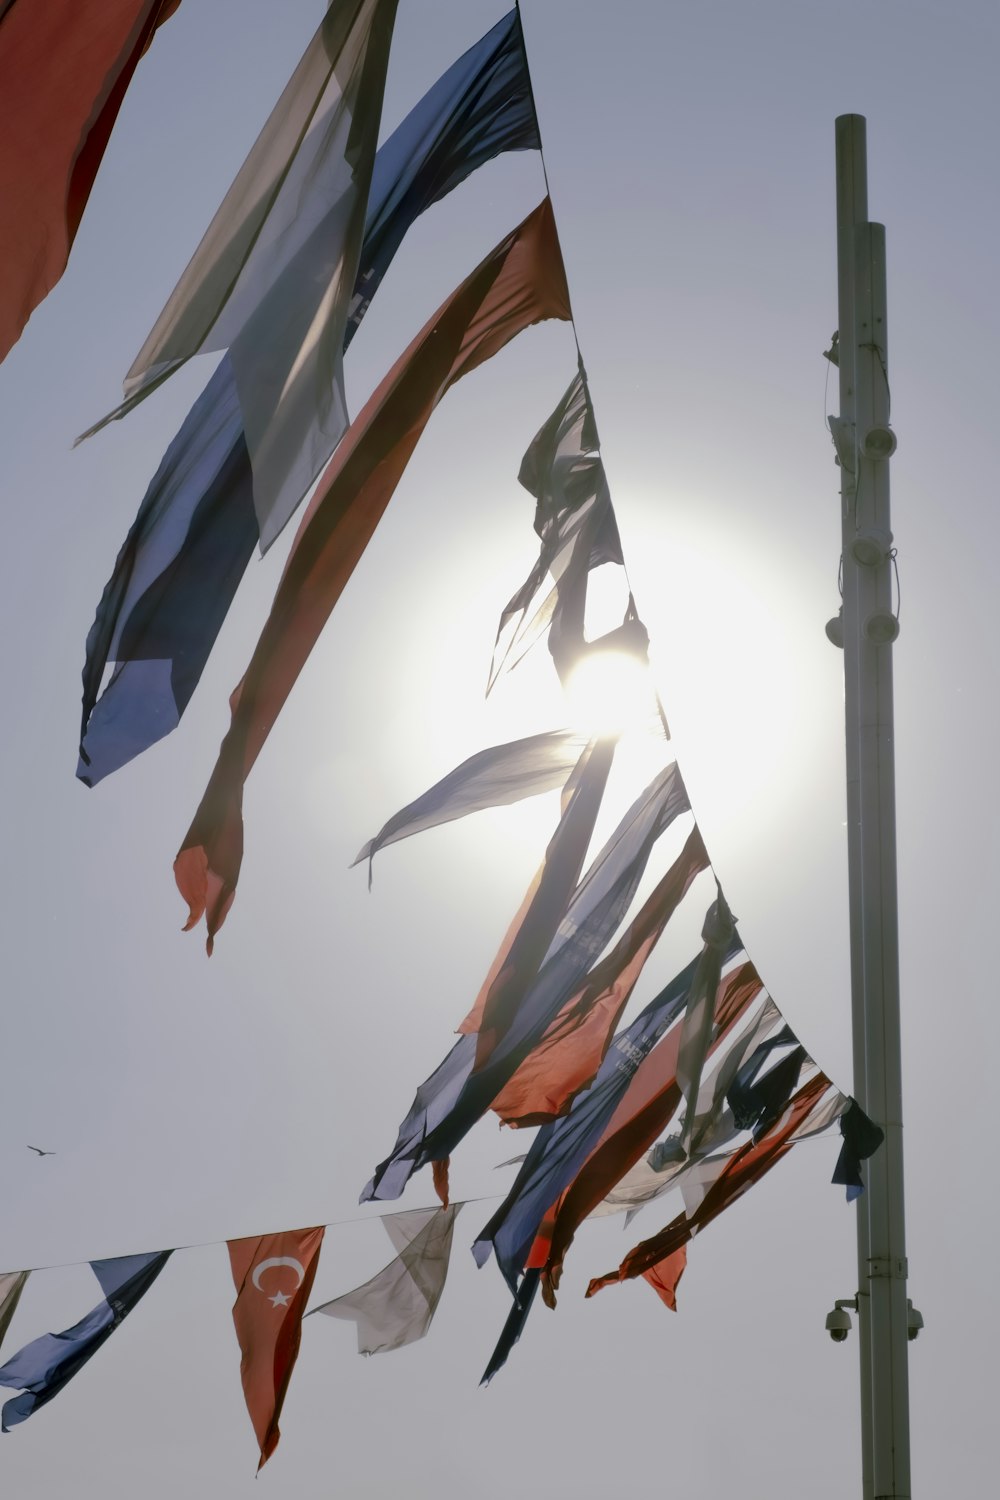 a bunch of flags that are flying in the air